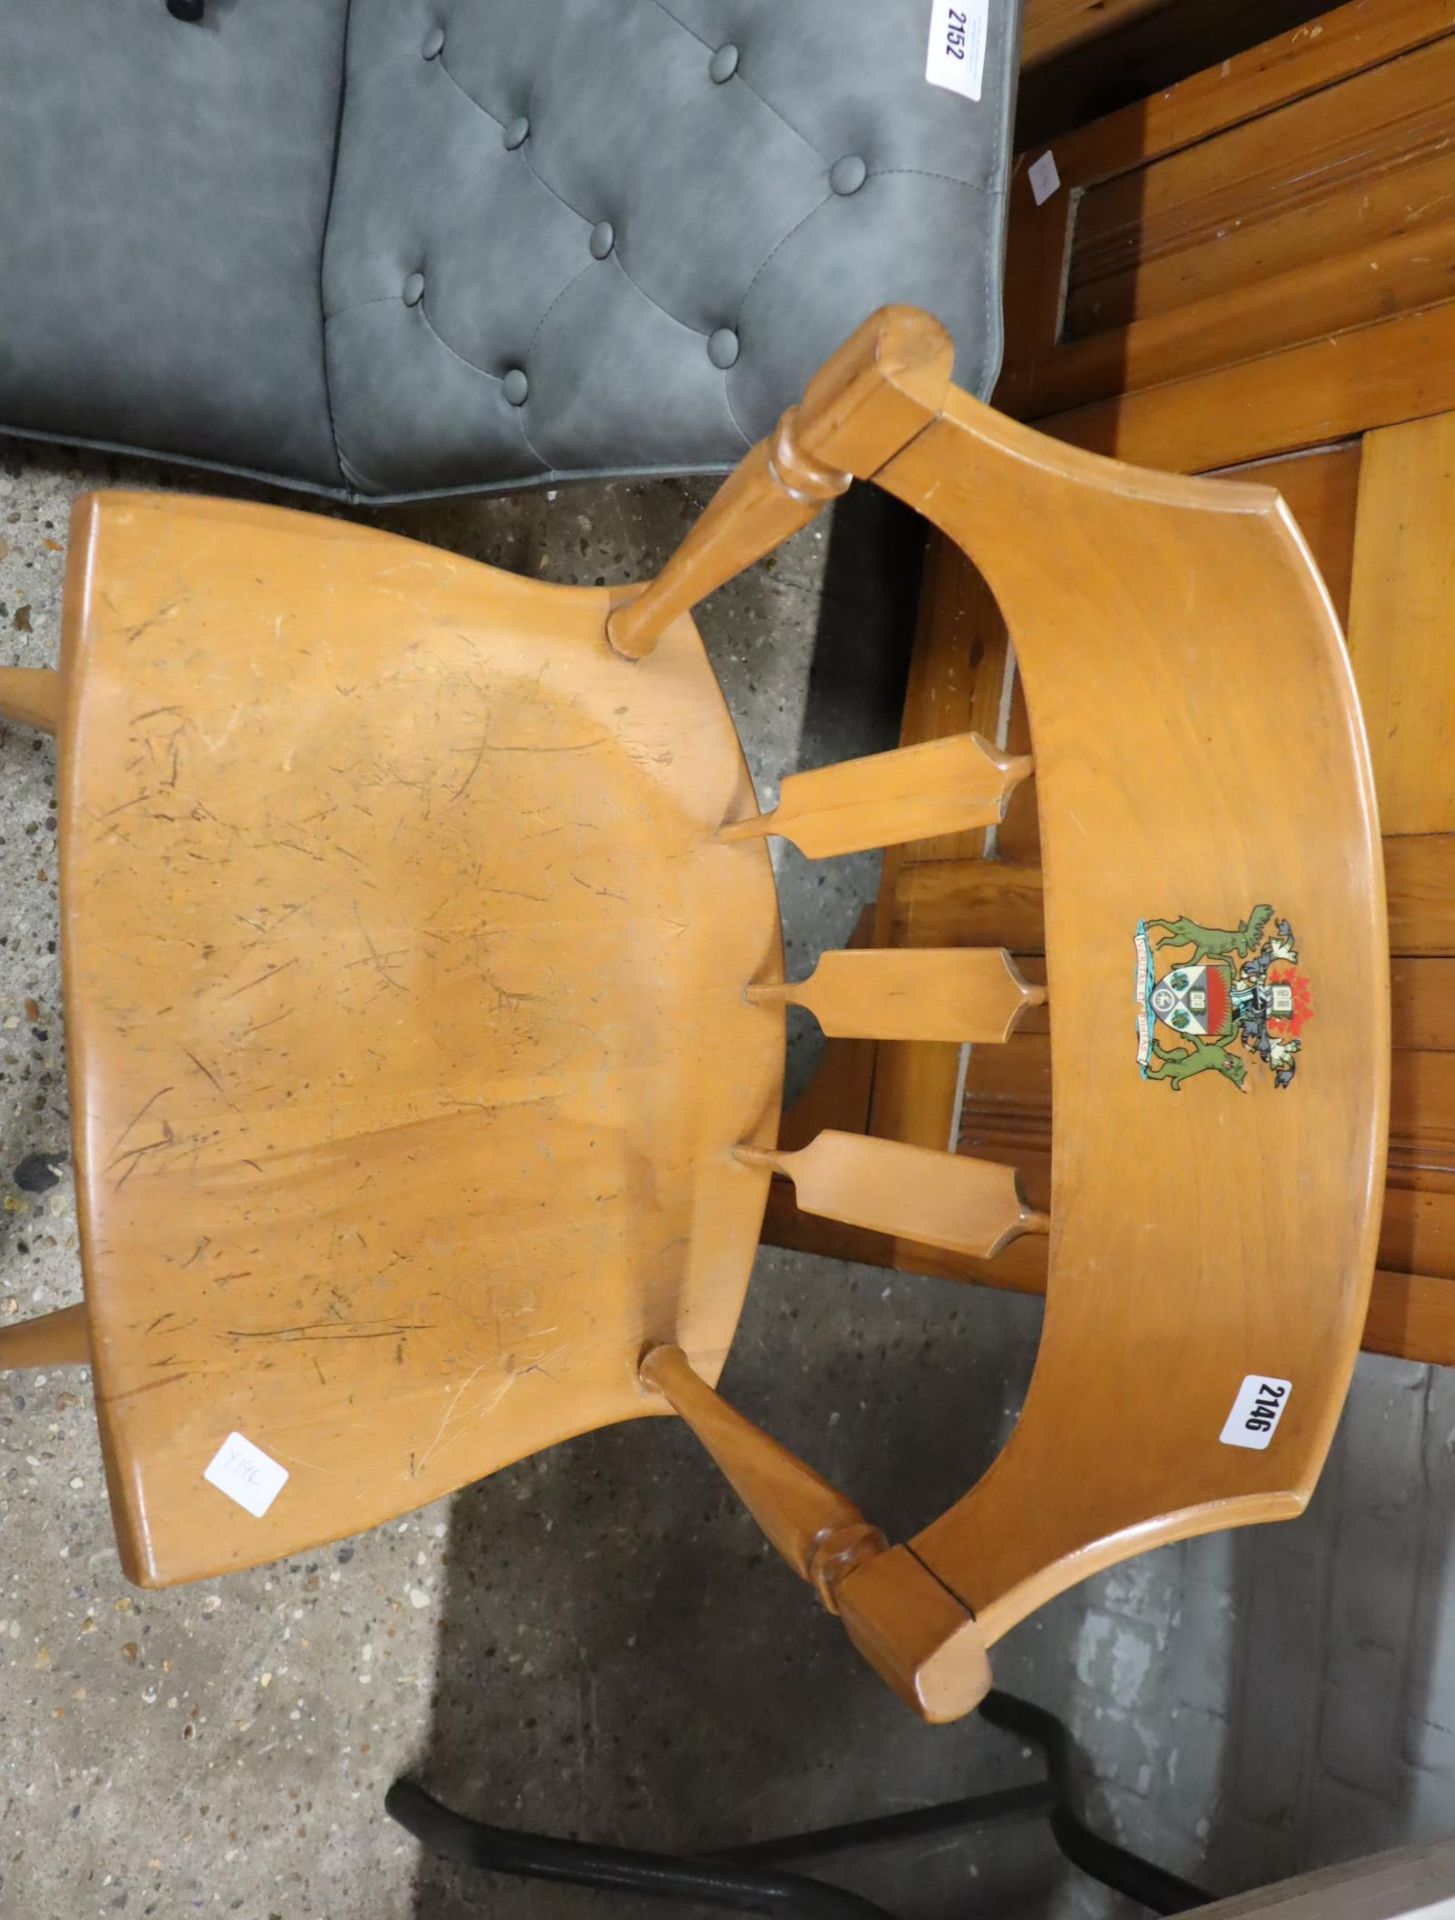 Wooden chair baring printed crest